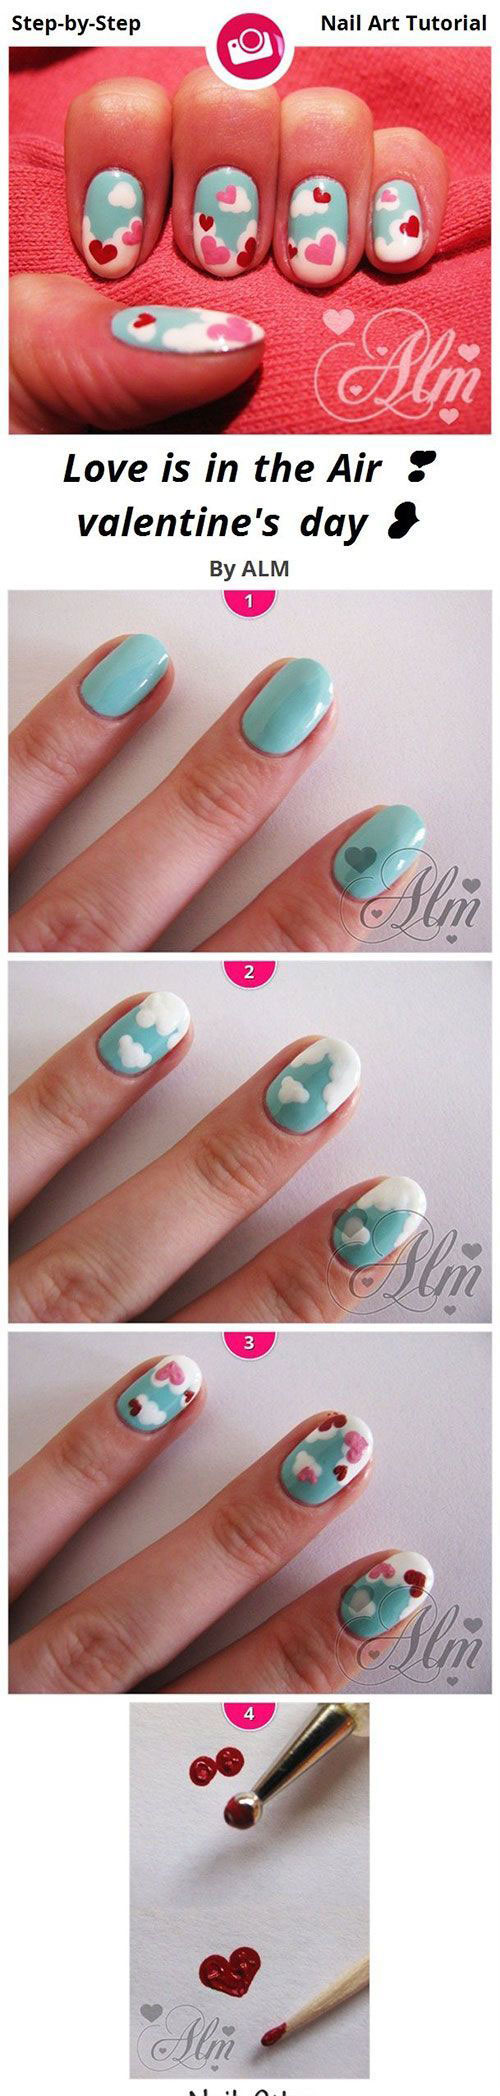 15-Easy-Simple-Valentines-Day-Nails-Tutorials-For-Beginners-2017-12